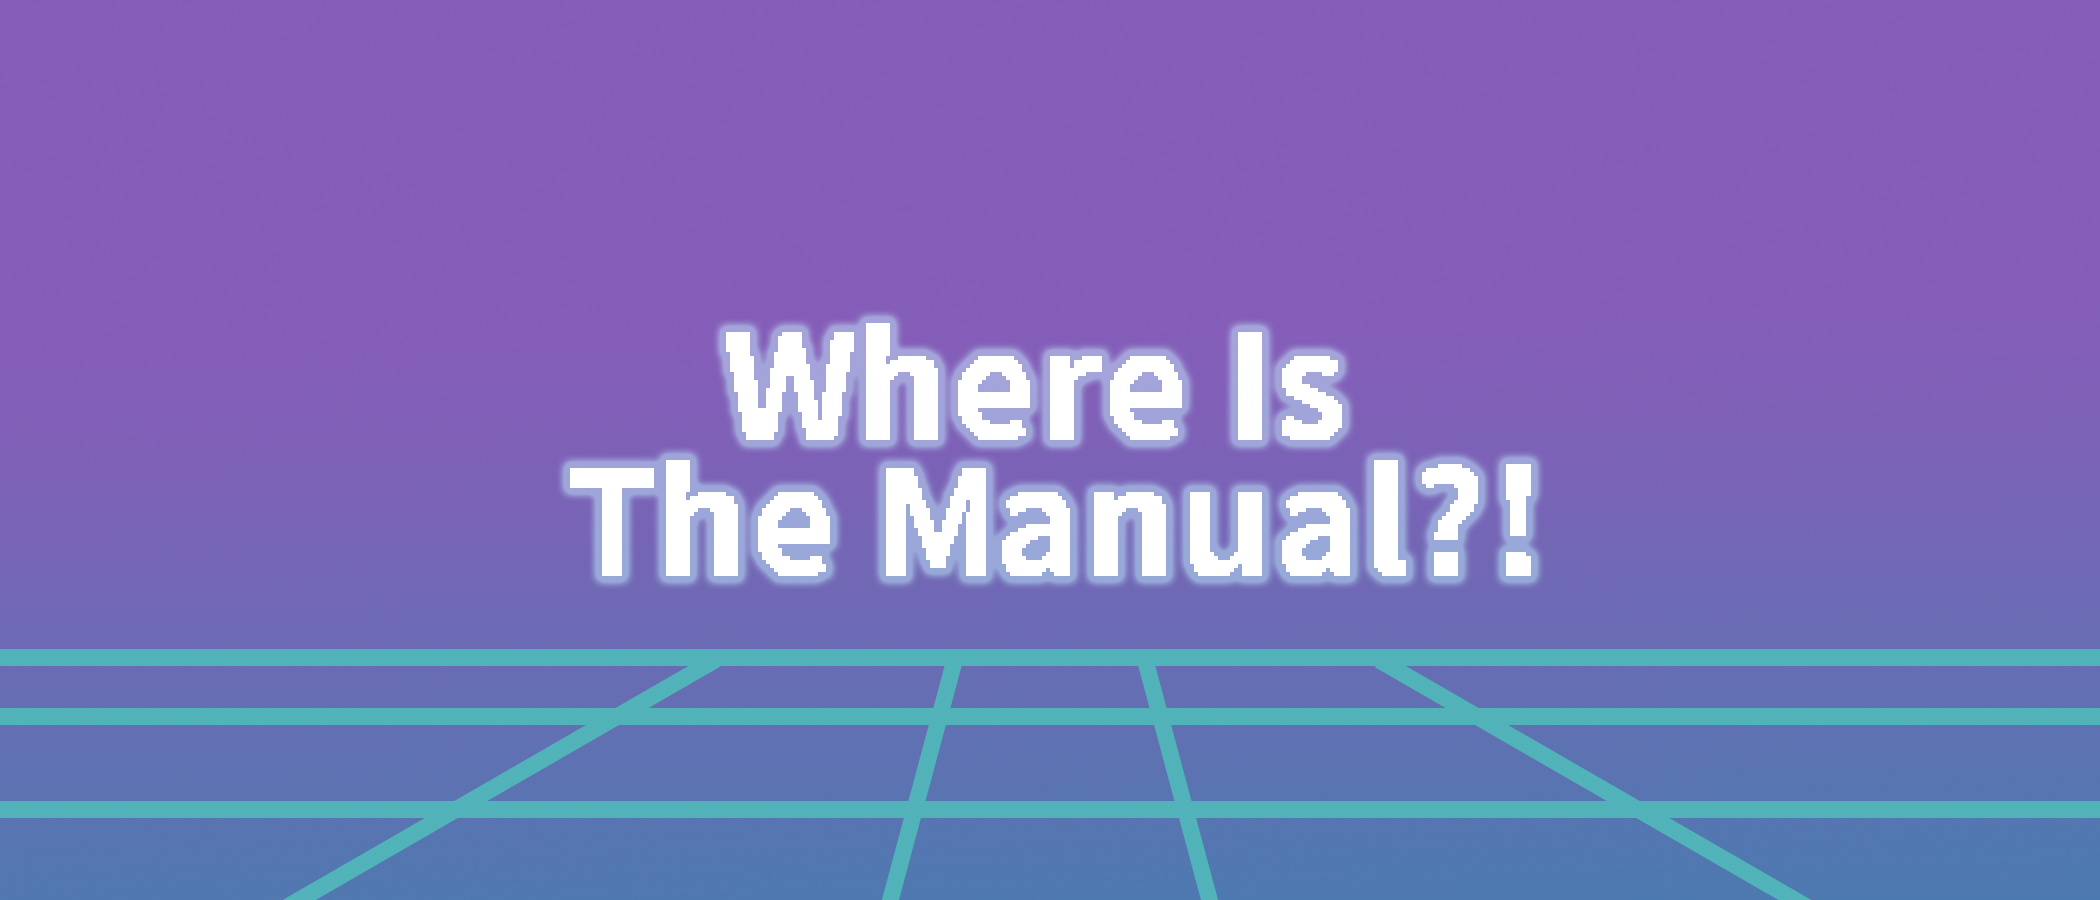 Where Is The Manual?!